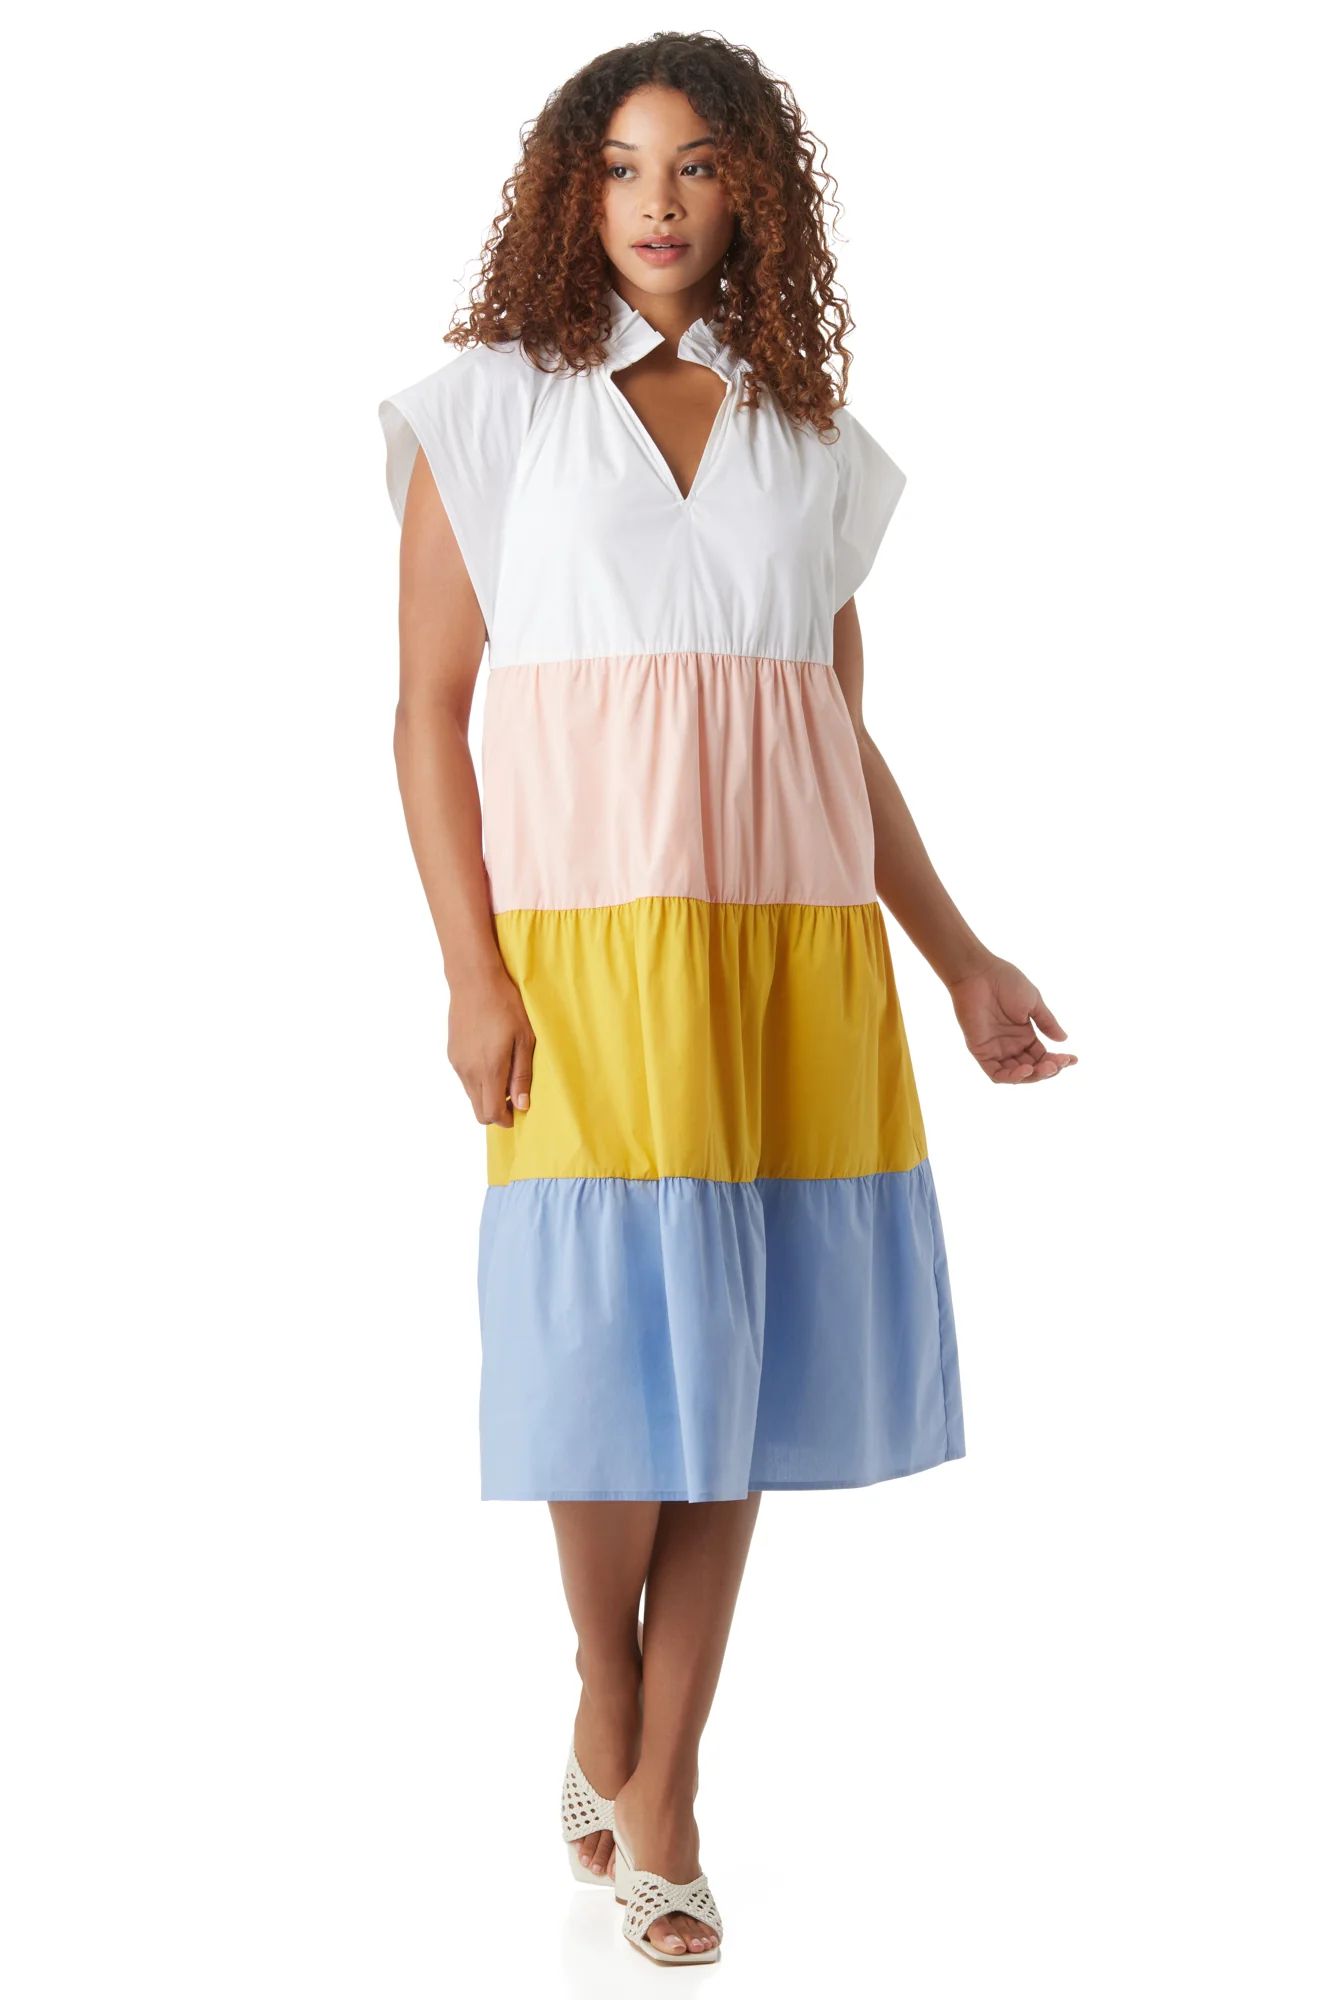 Watts Dress in Spring Colorblock | CROSBY by Mollie Burch | CROSBY by Mollie Burch